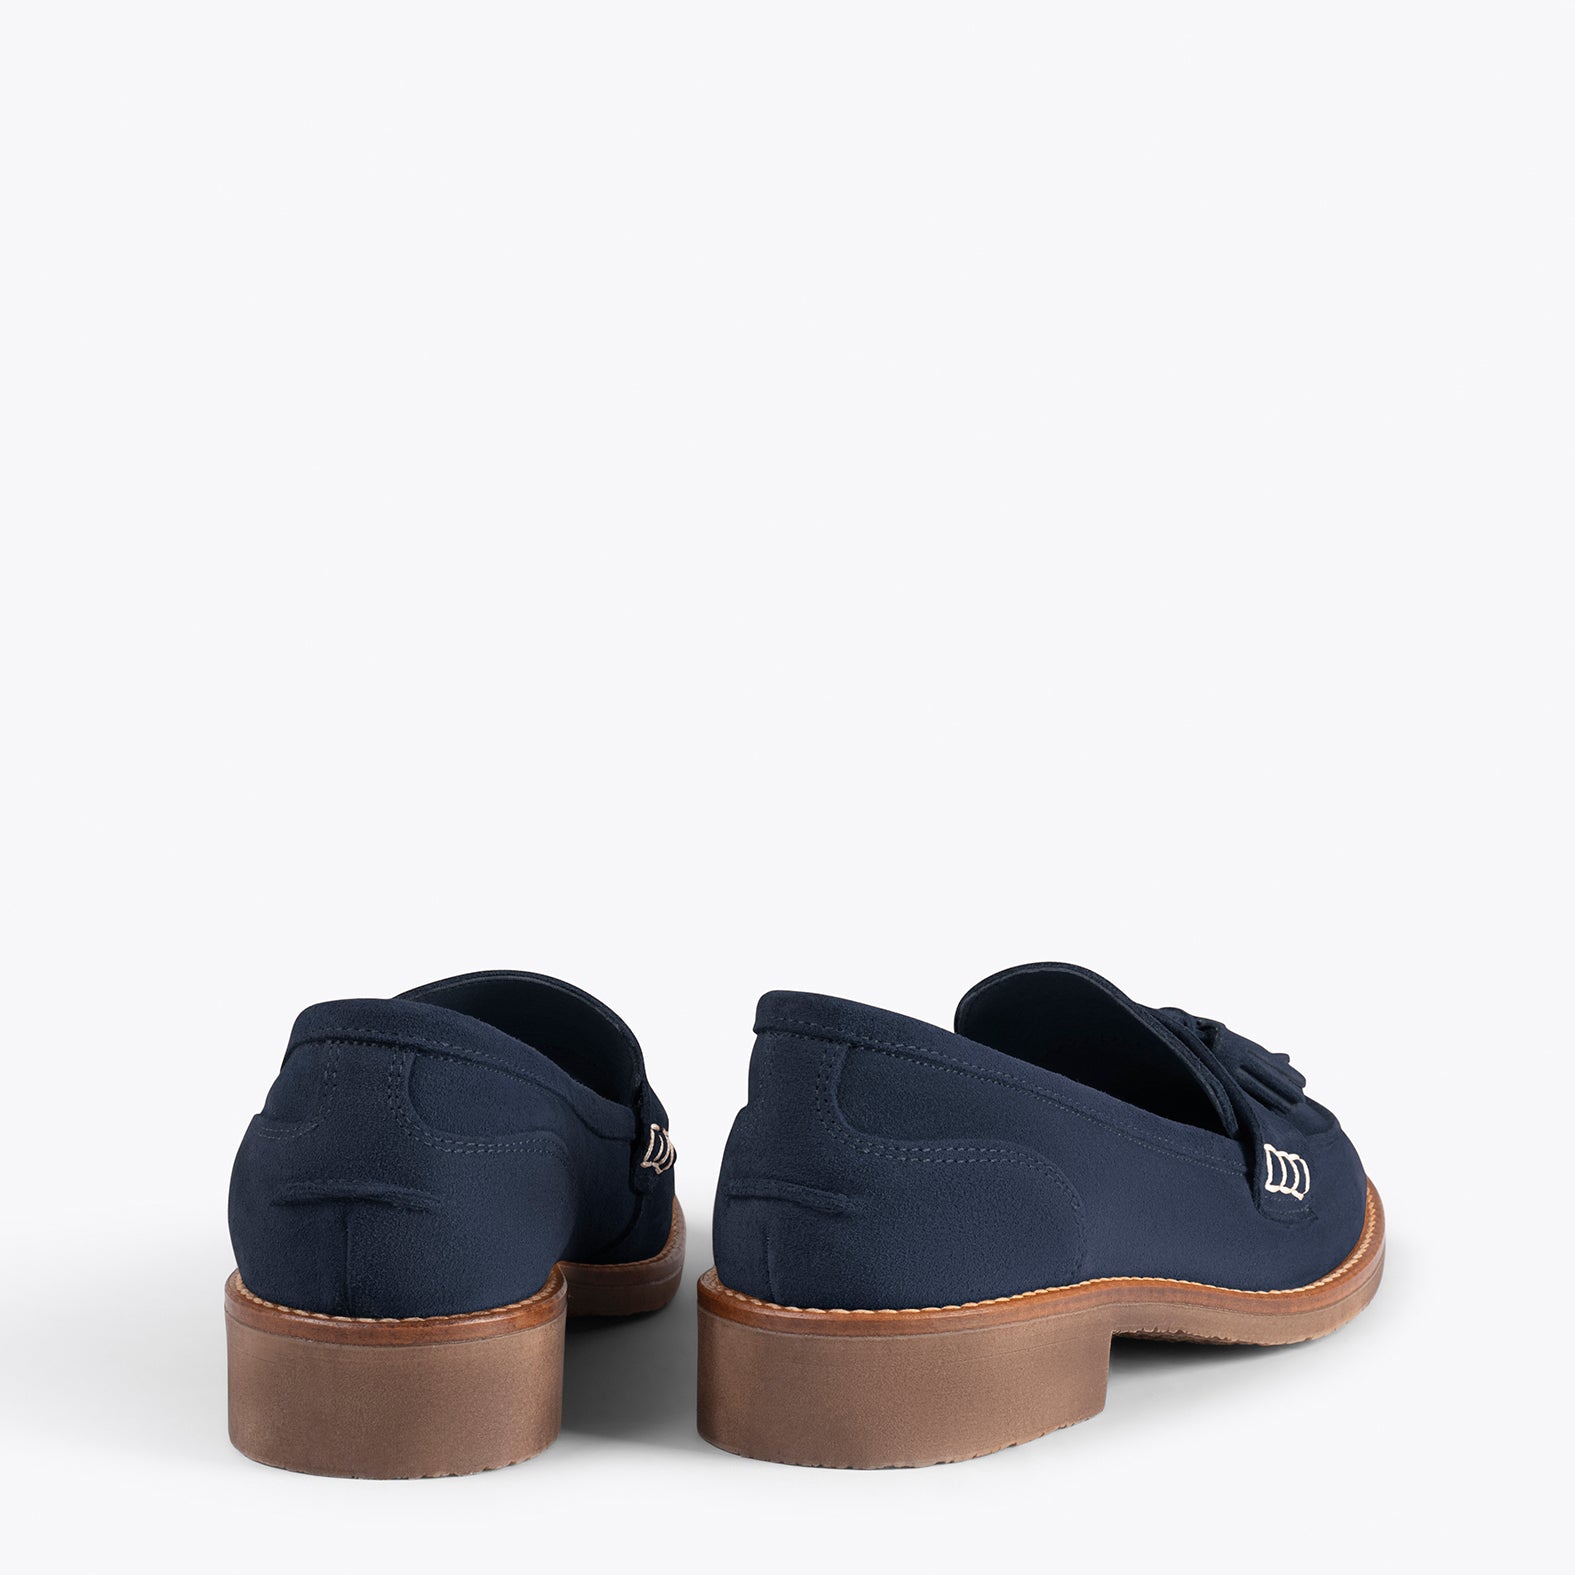 CASTELLANO – NAVY moccasin with tassel